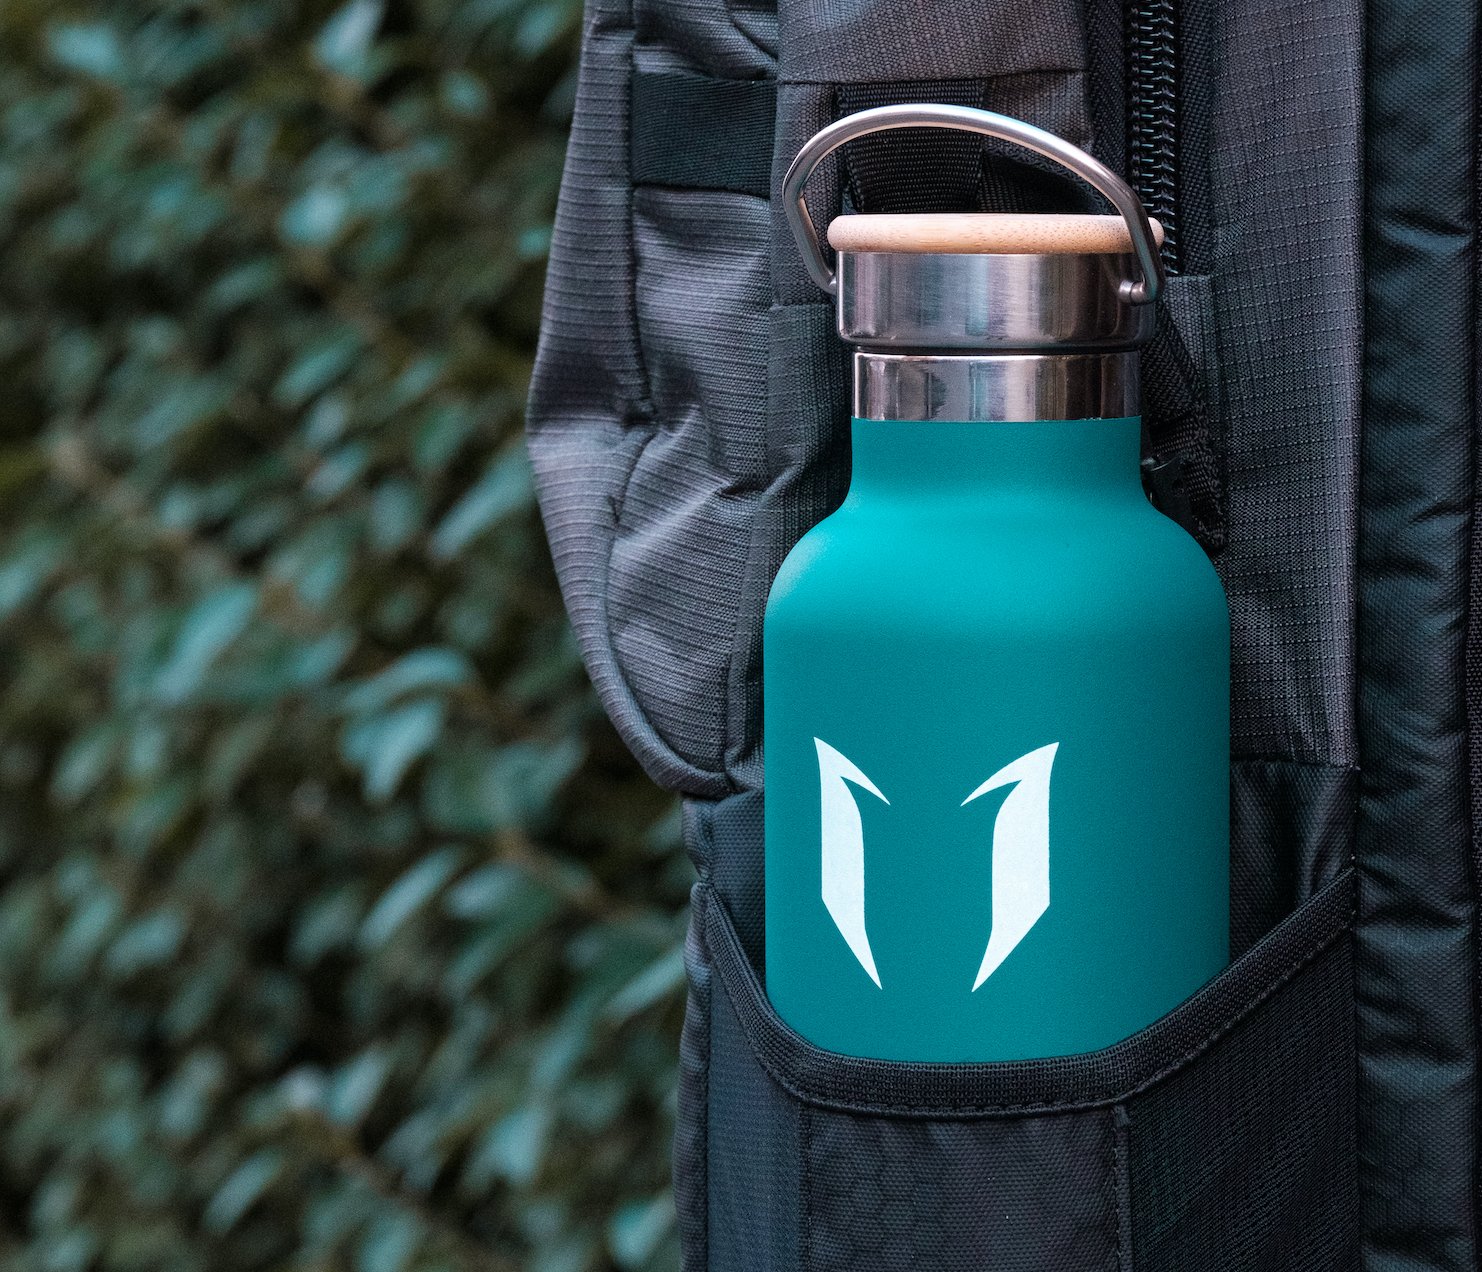 Super Sparrow Steel Water Bottles: Top Quality at Half the Price